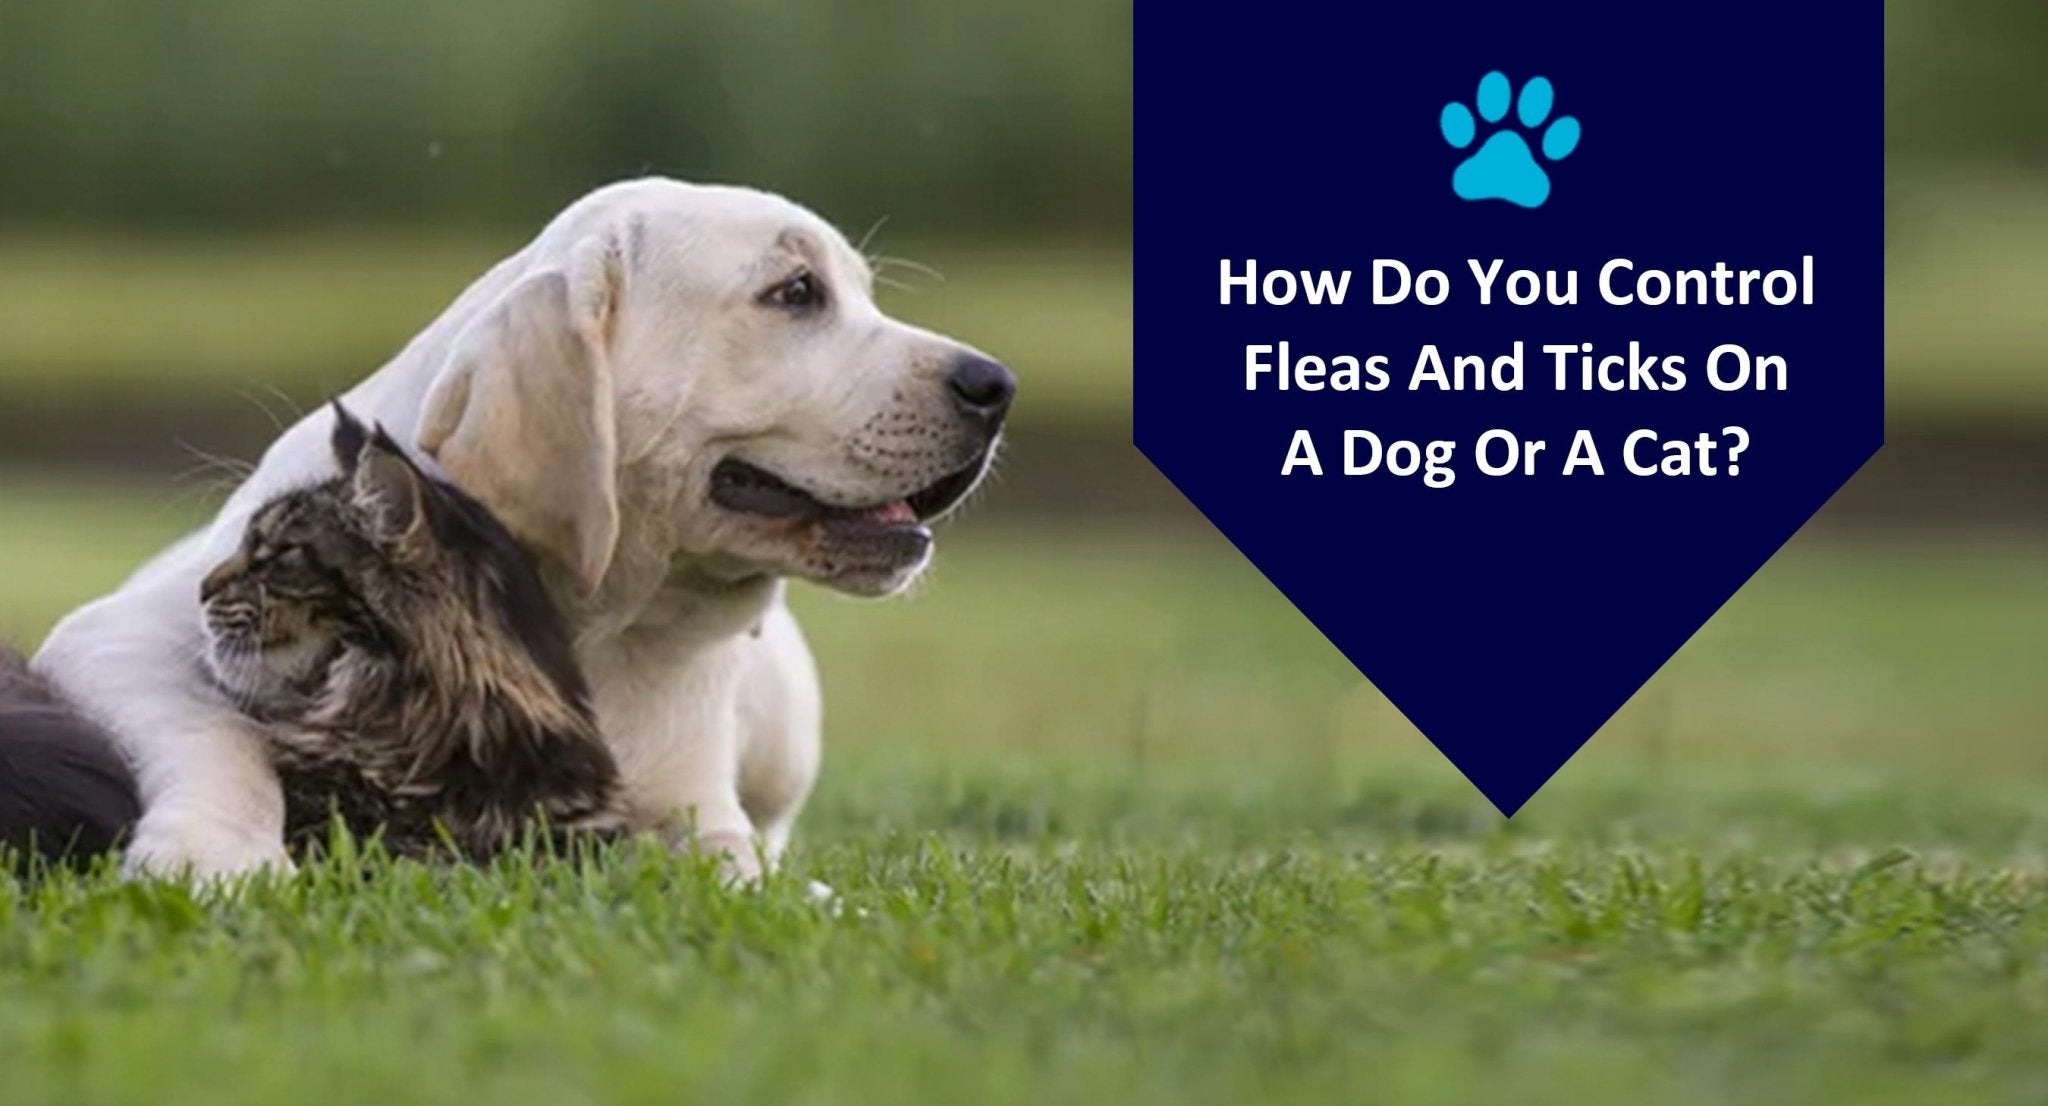 How Do You Control Fleas And Ticks On A Dog Or A Cat?